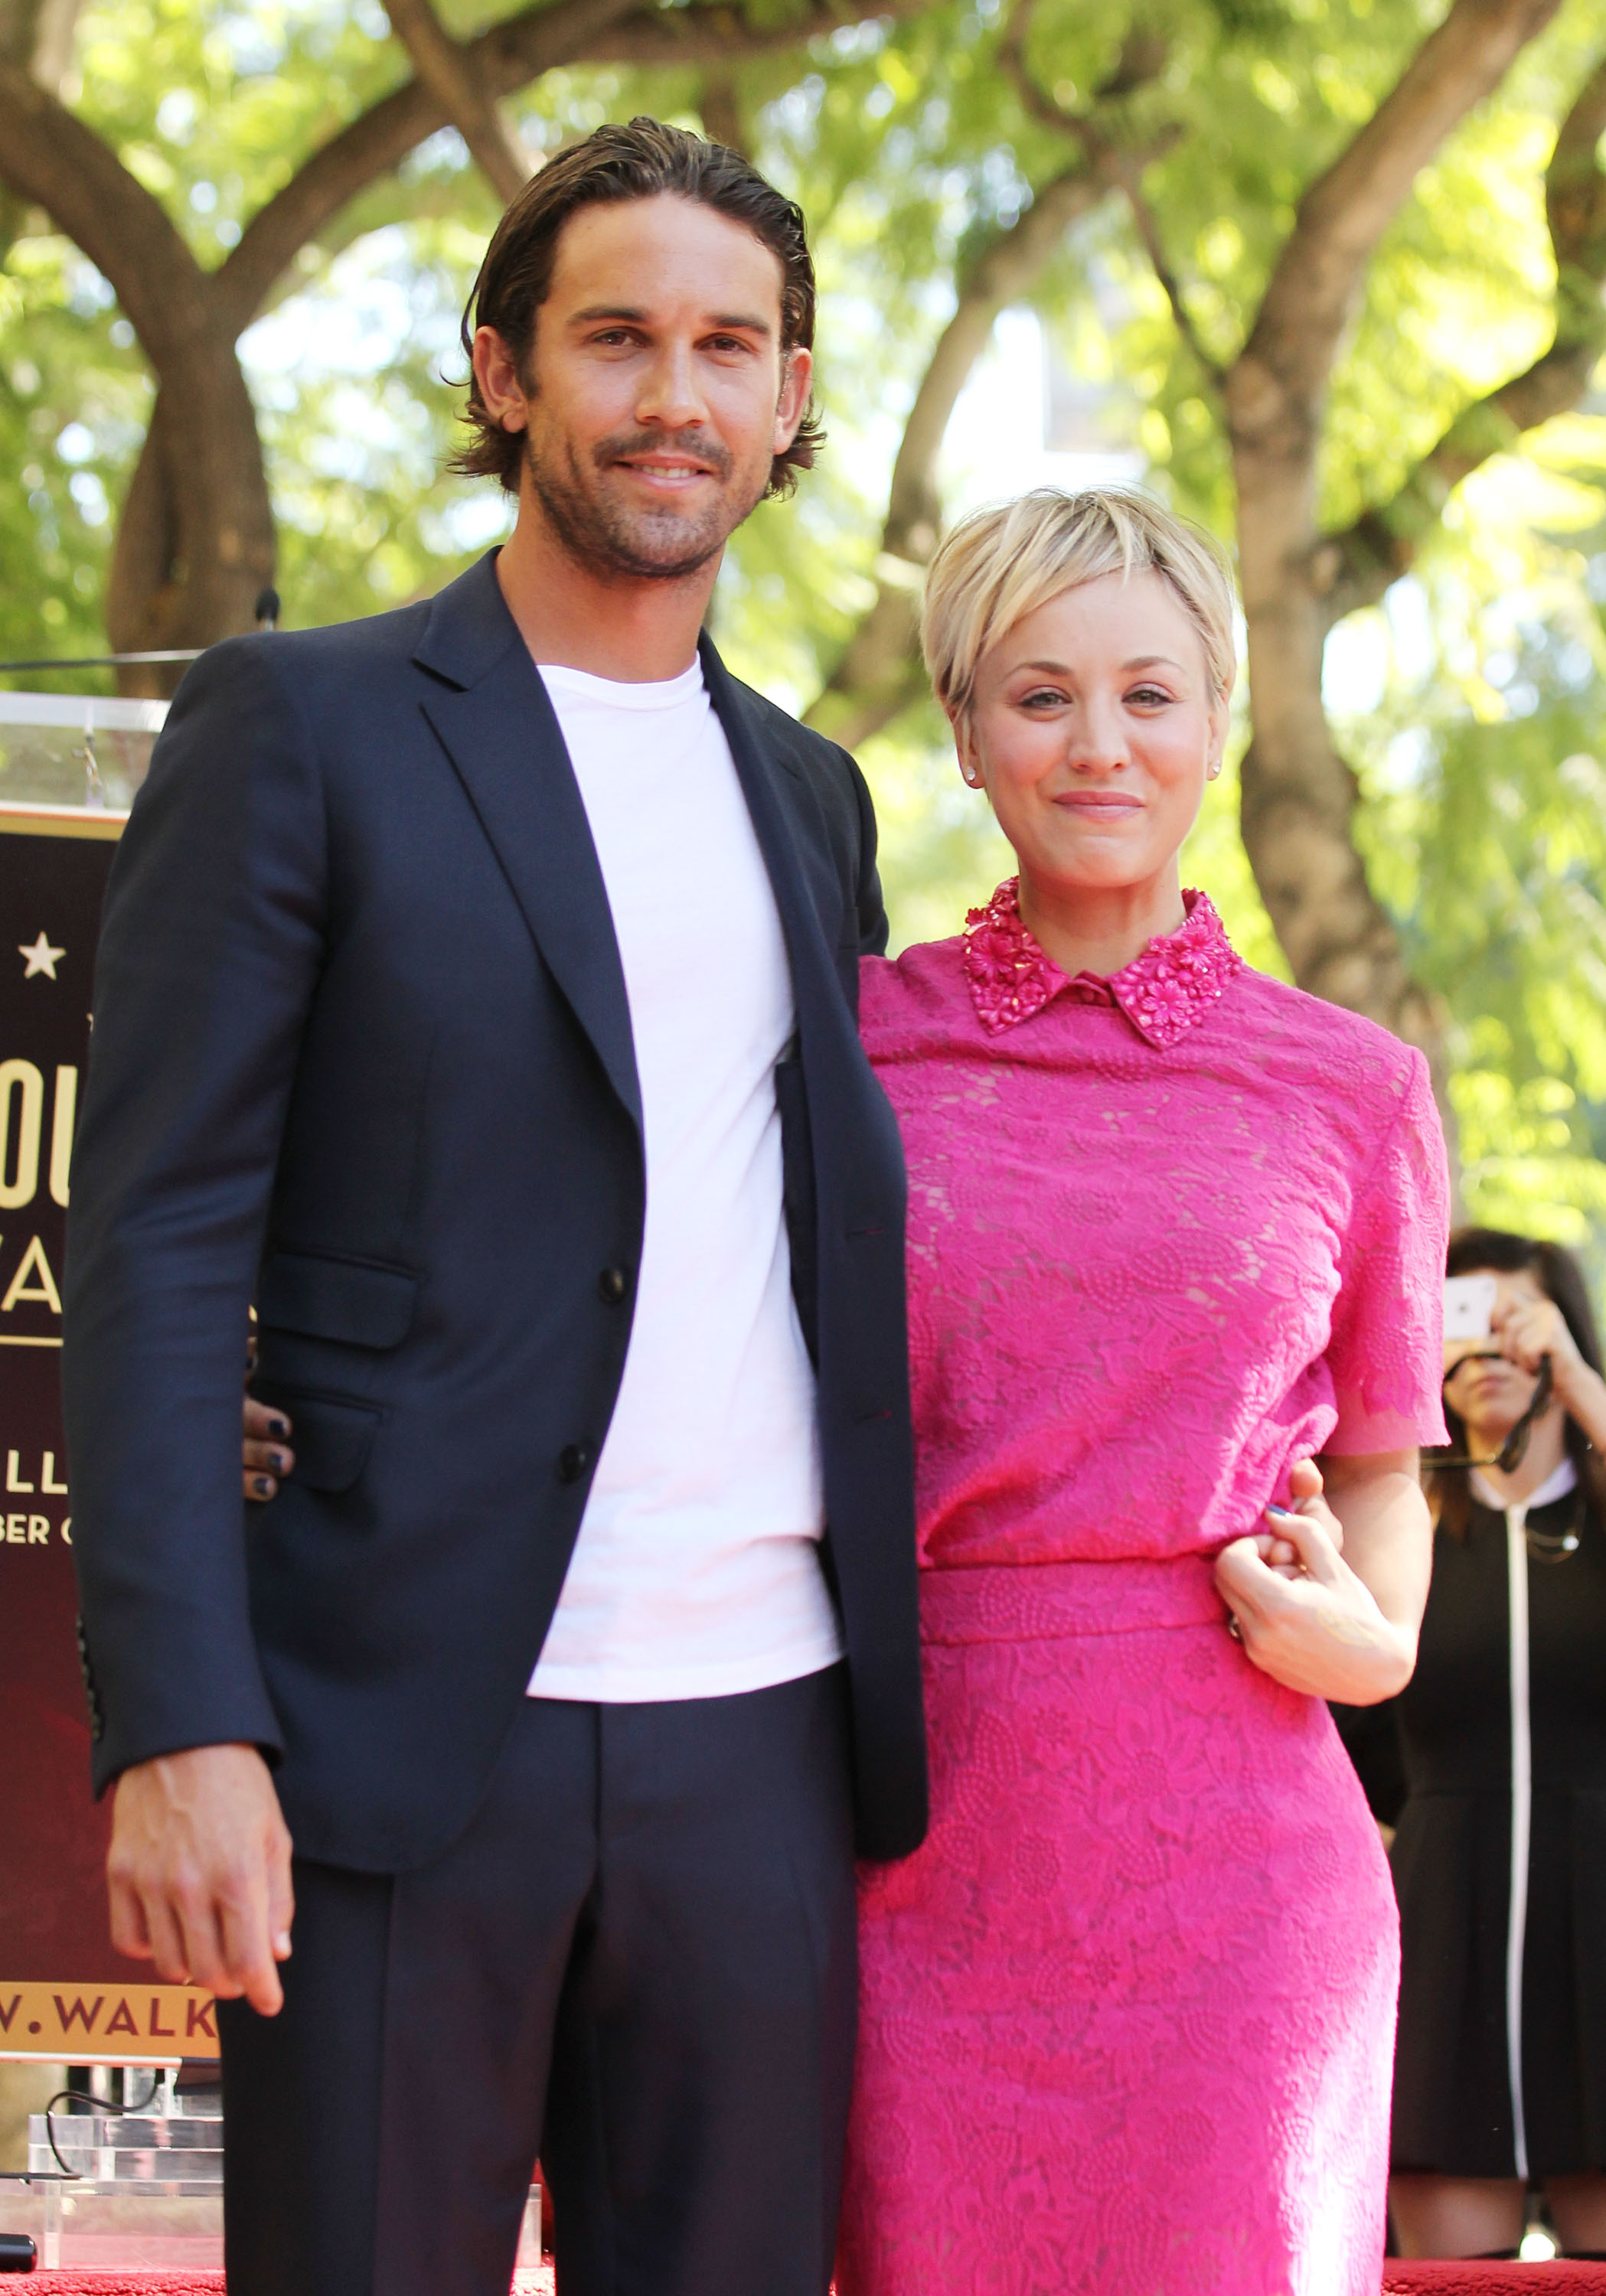 Kaley Cuoco and Ryan Sweeting in Hollywood in 2014 | Source: Getty Images